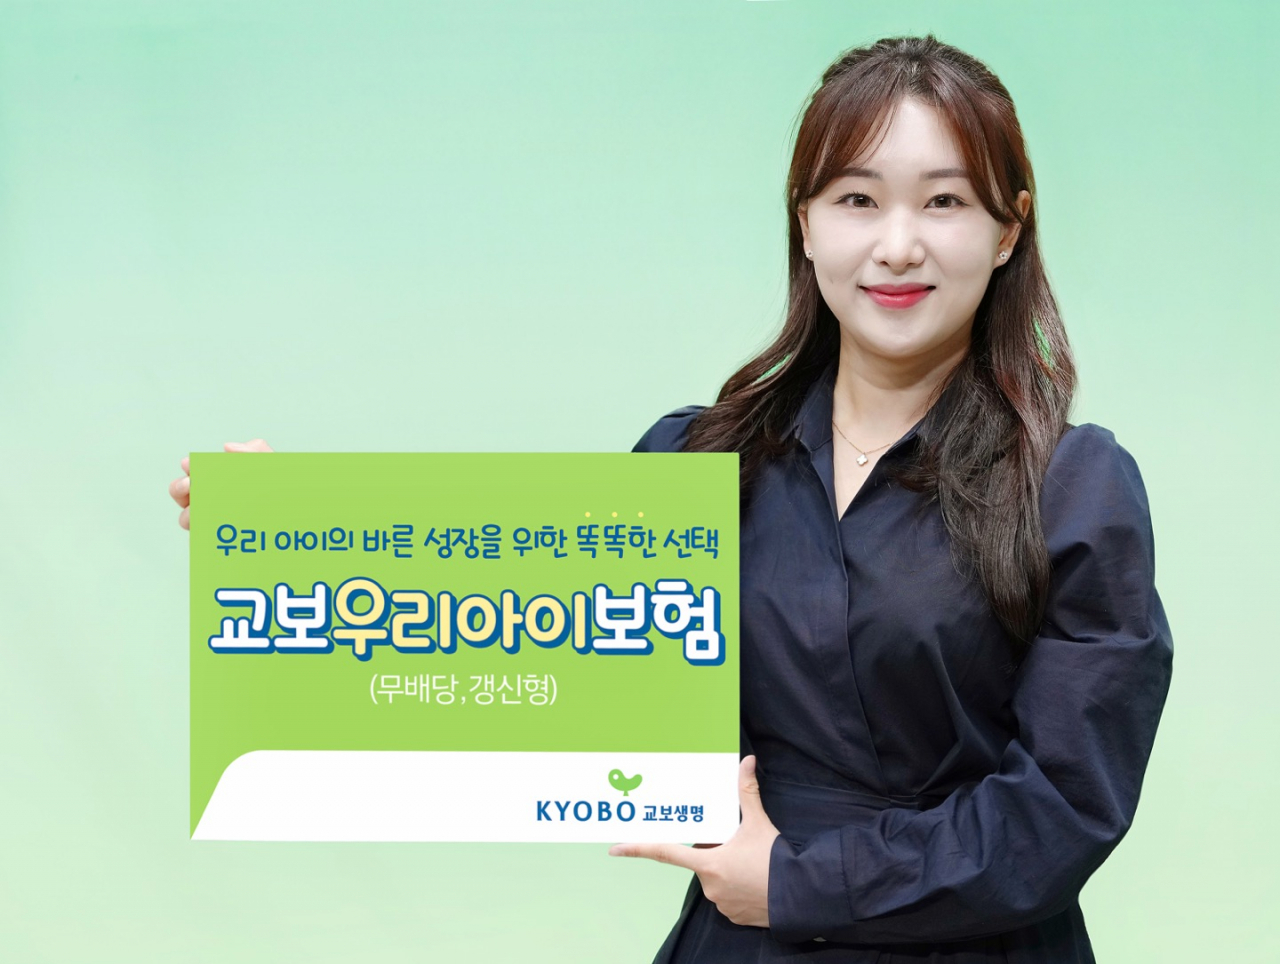 A Kyobo Life Insurance employee holds a placard to introduce Kyobo's new child insurance product. (Kyobo Life Insurance)